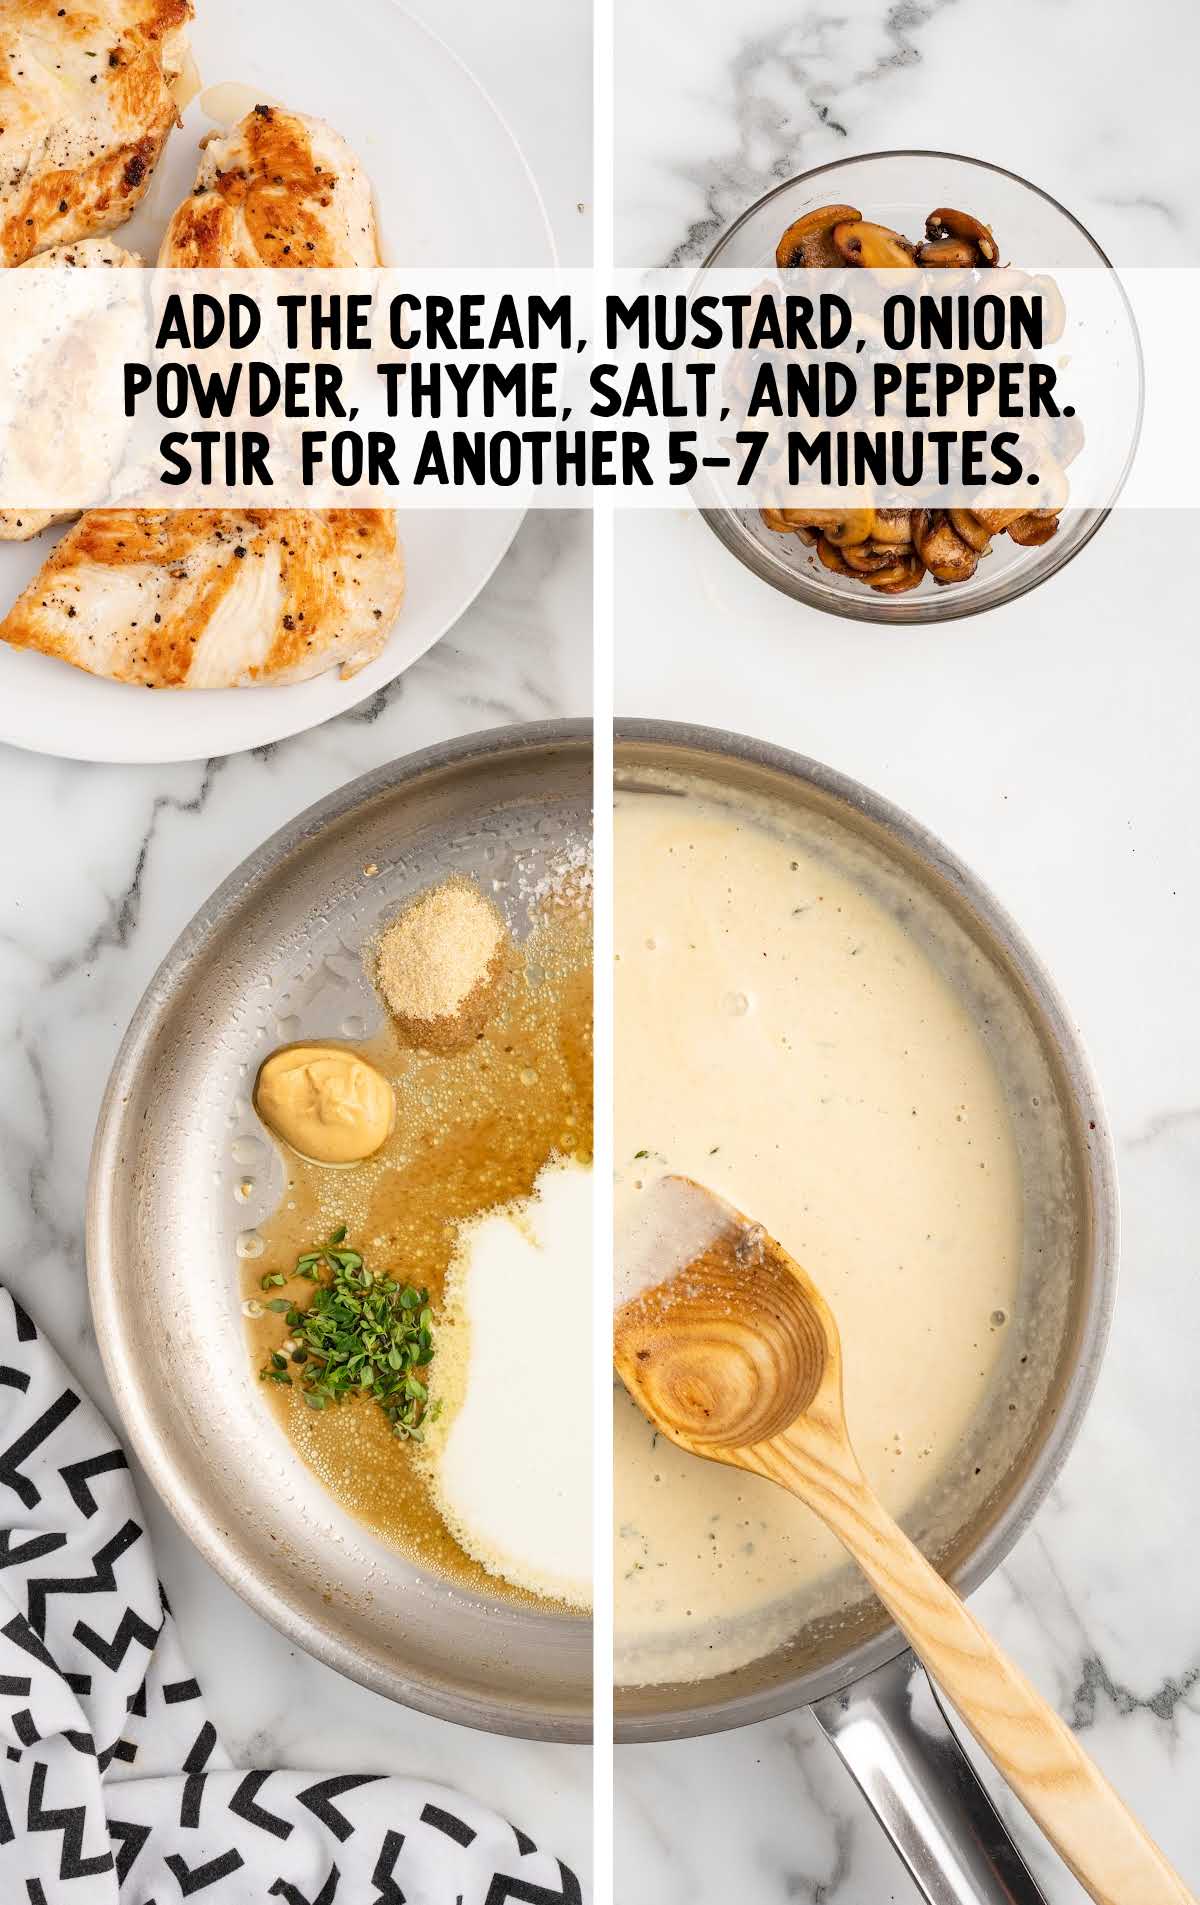 cream, mustard, onion powder, thyme, salt, and pepper added to a skillet